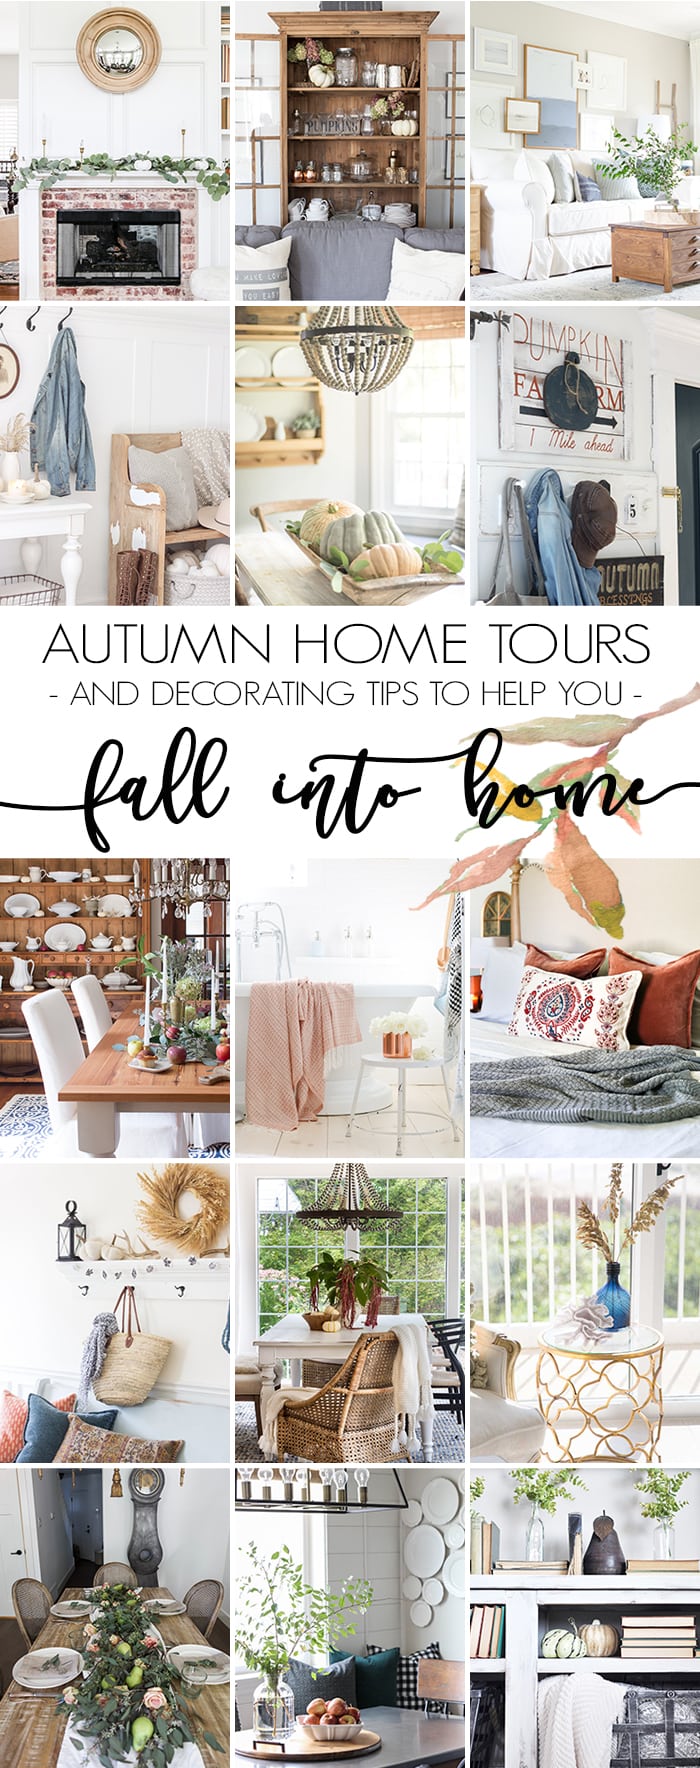 Fall decor with white pumpkins and lots of neutral textures makes for a simple, serene fall look. Don't miss these fall decorating tips and ideas for creating a cozy home. #falldecor